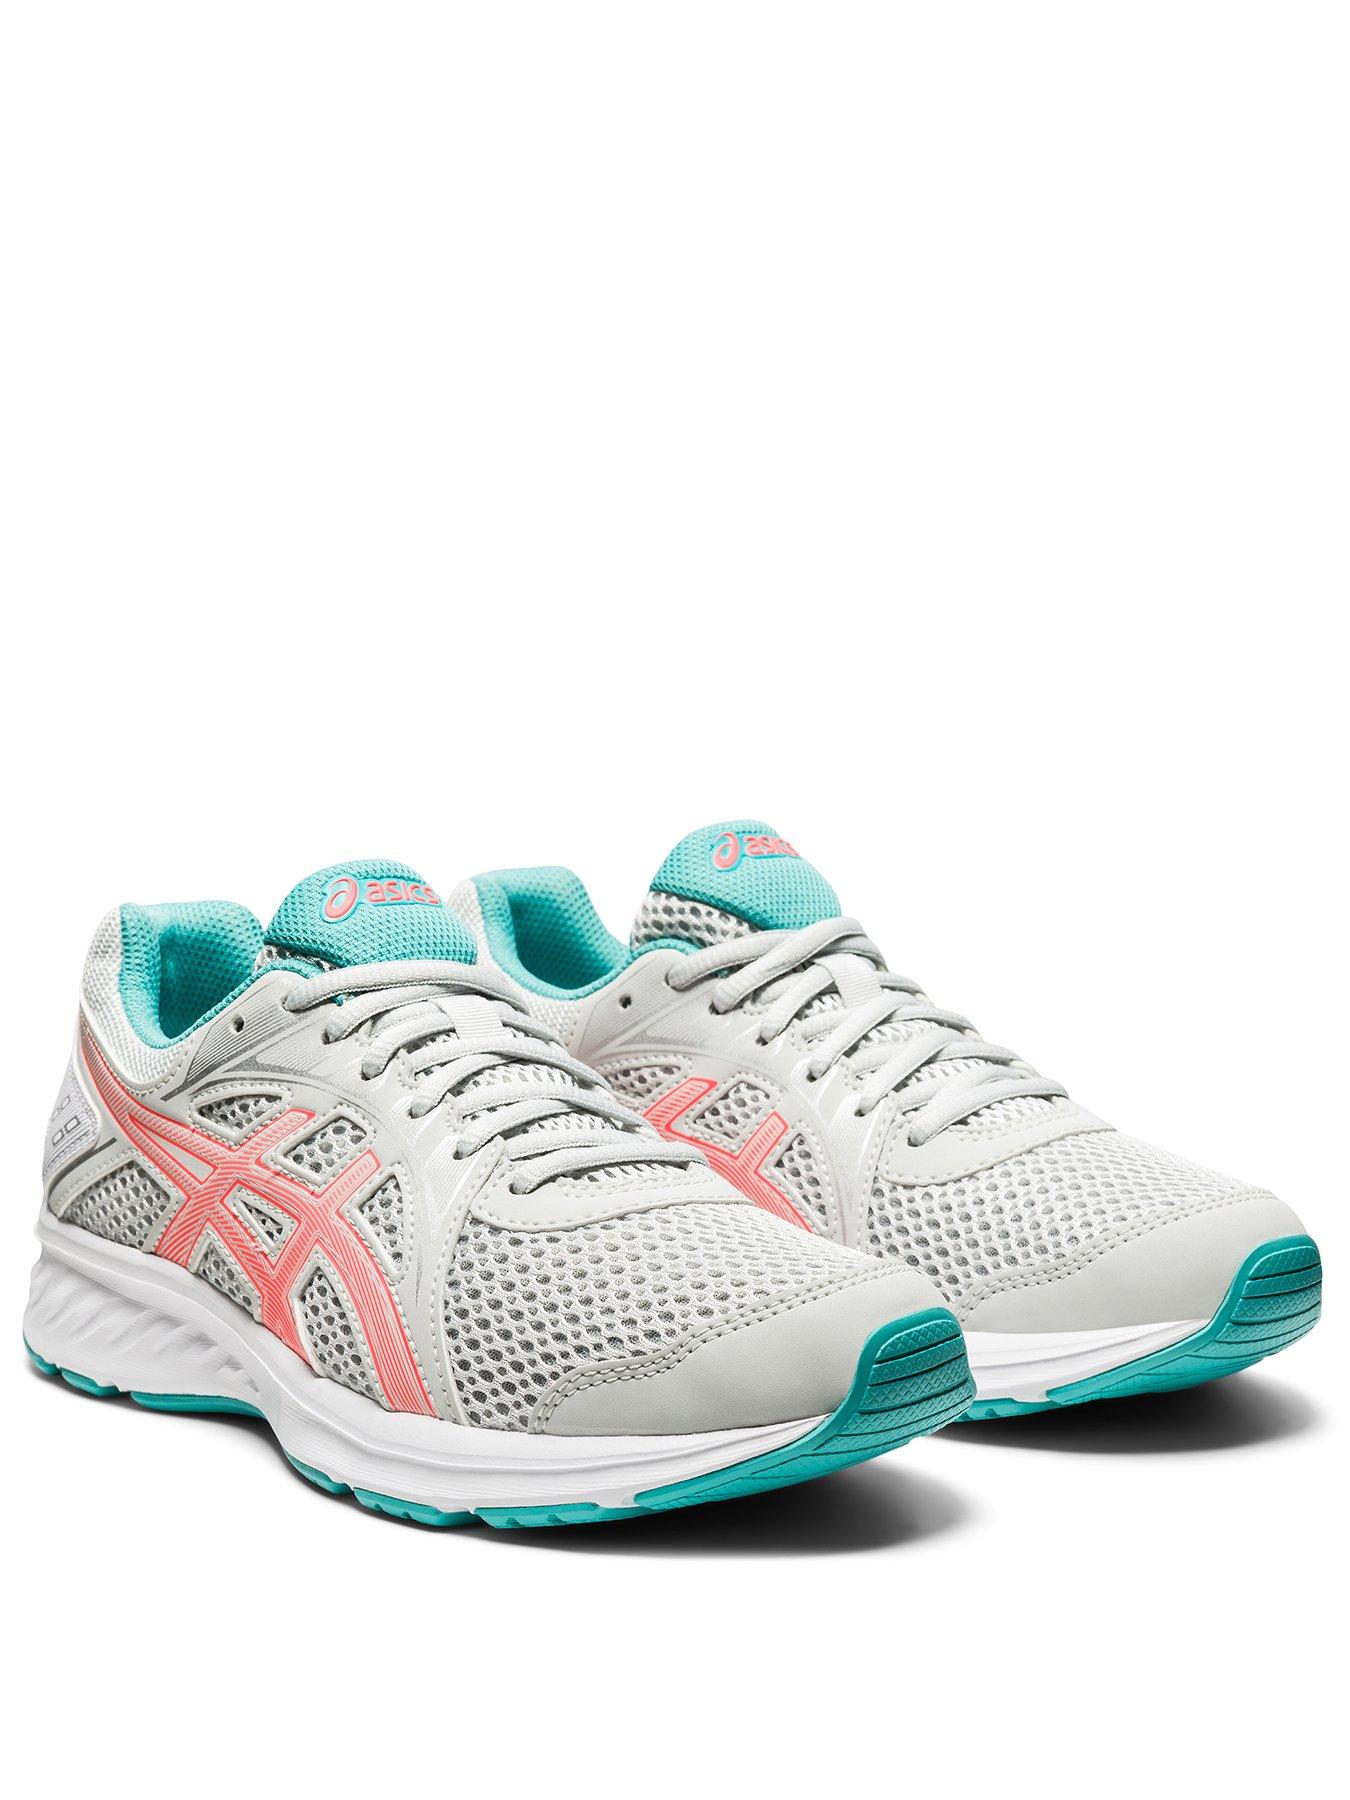 asics trainers littlewoods 